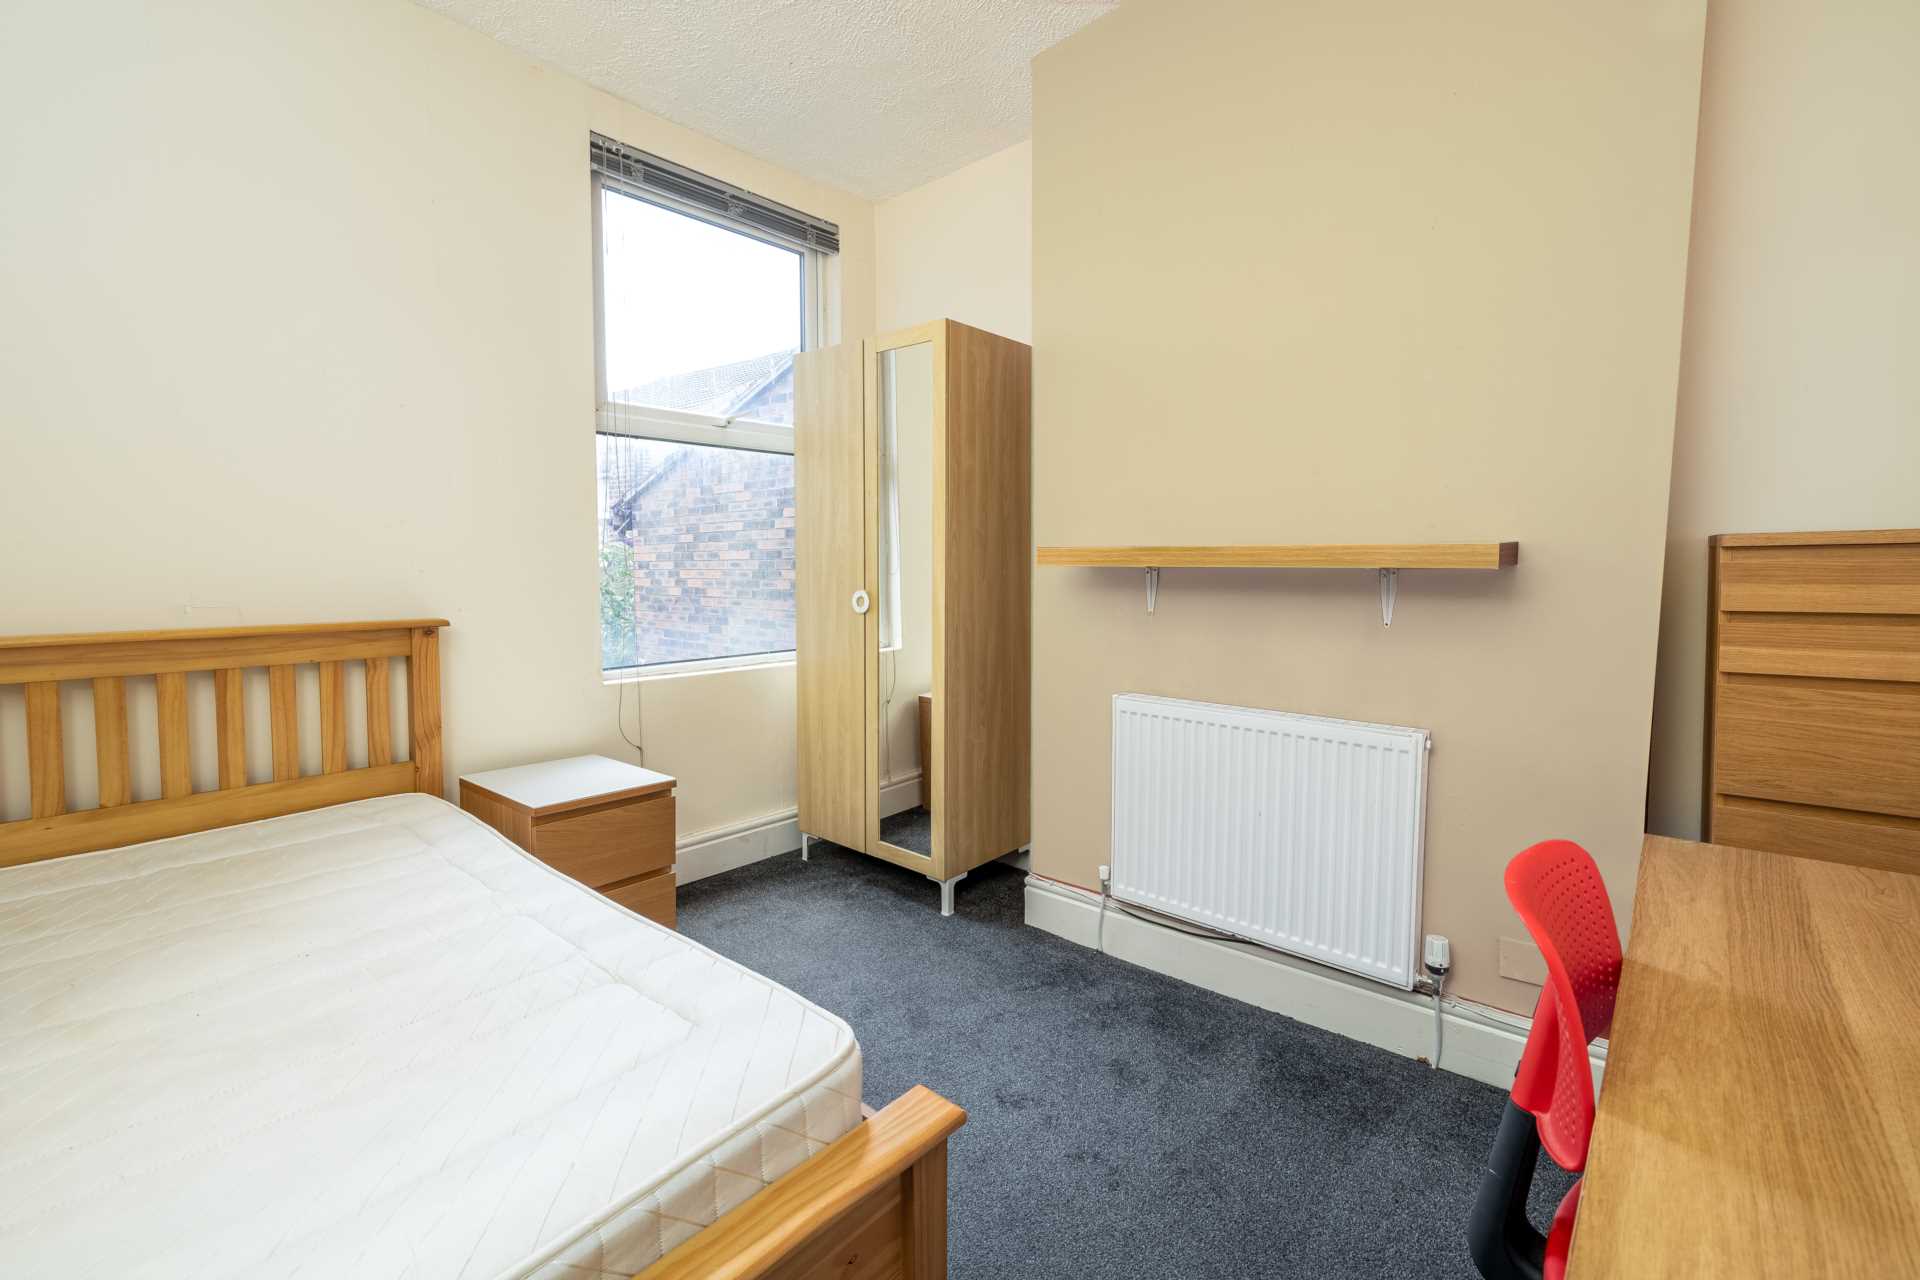 Garmoyle Road, Wavertree - NO DEPOSIT - BILLS INCLUDED - FIRST 3 MONTHS FREE, Image 6